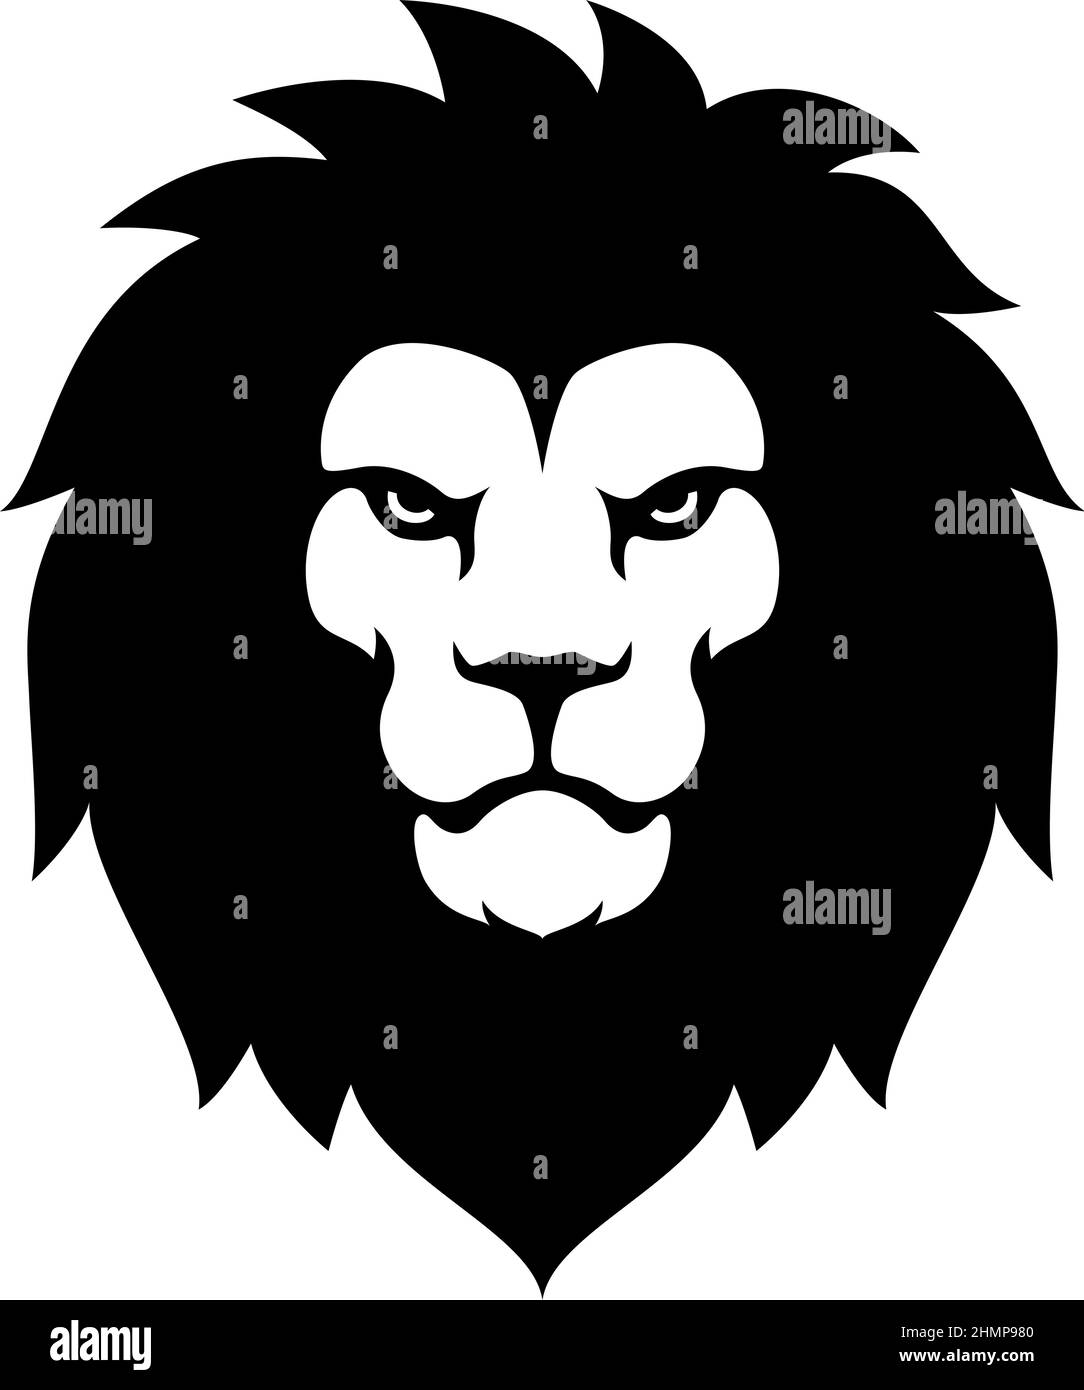 Simple Design of Serious Lion Head Stock Vector